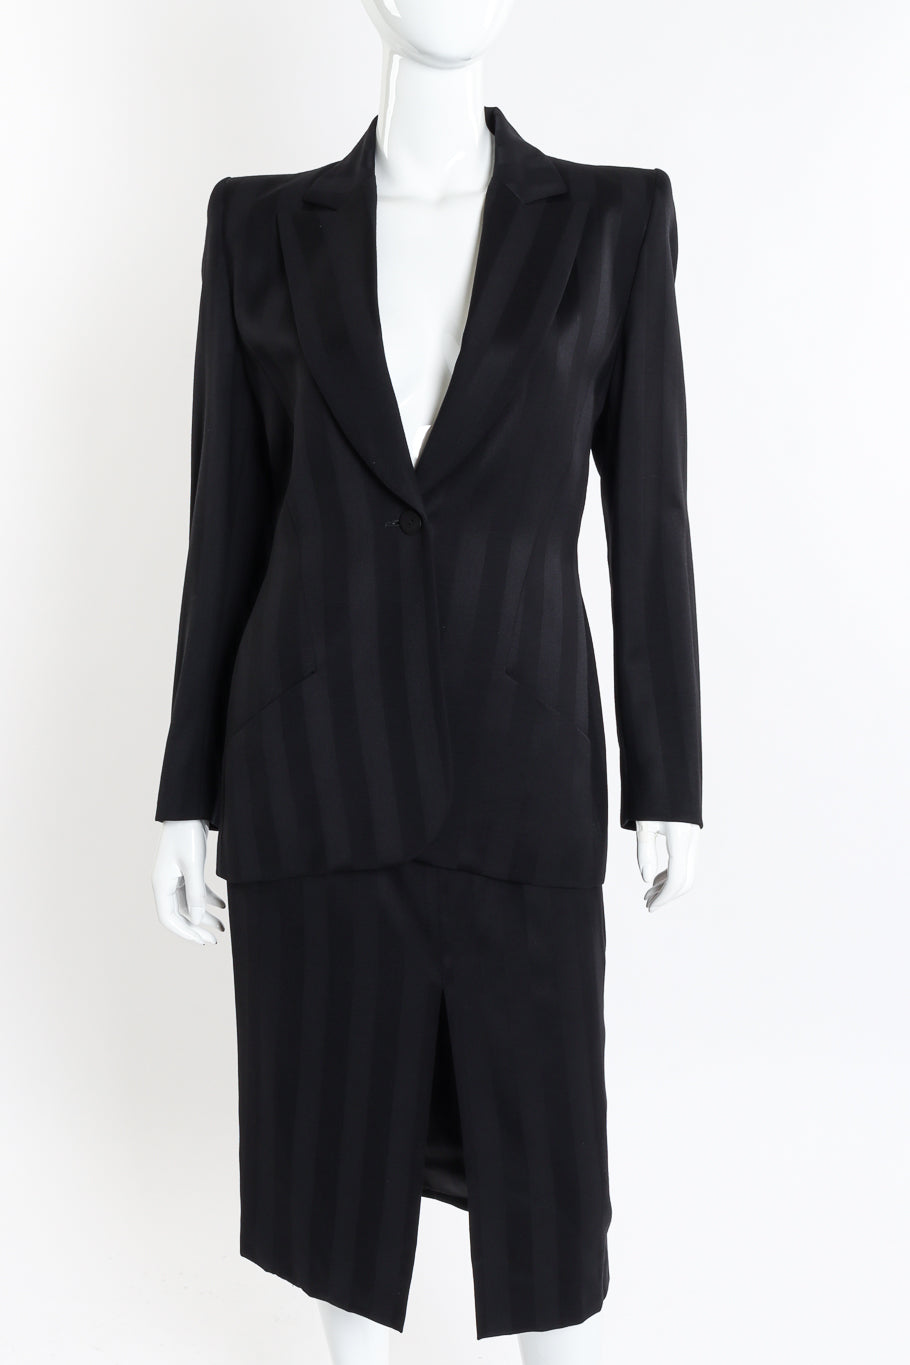 Vented Wool Stripe Blazer & Skirt Suit by Givenchy on mannequin front close @recessla